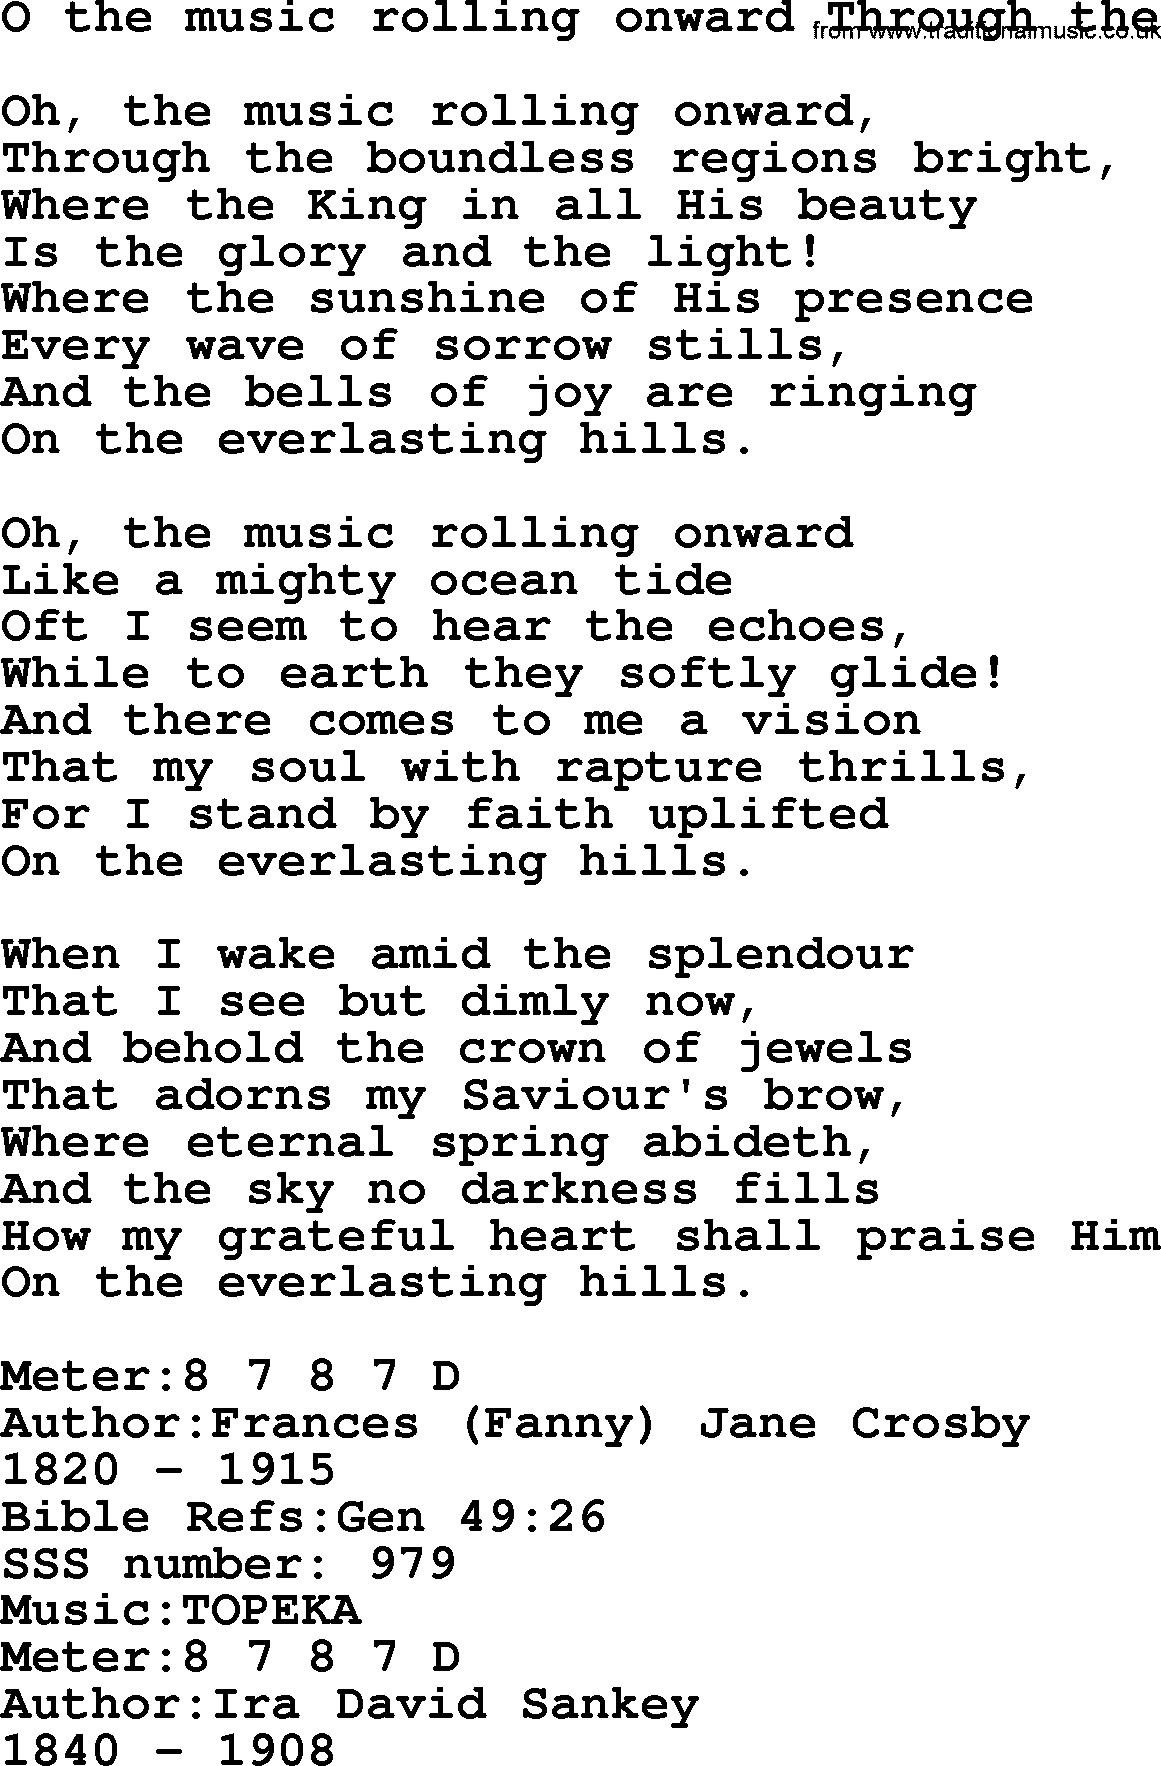 Sacred Songs and Solos complete, 1200 Hymns, title: O The Music Rolling Onward Through The, lyrics and PDF